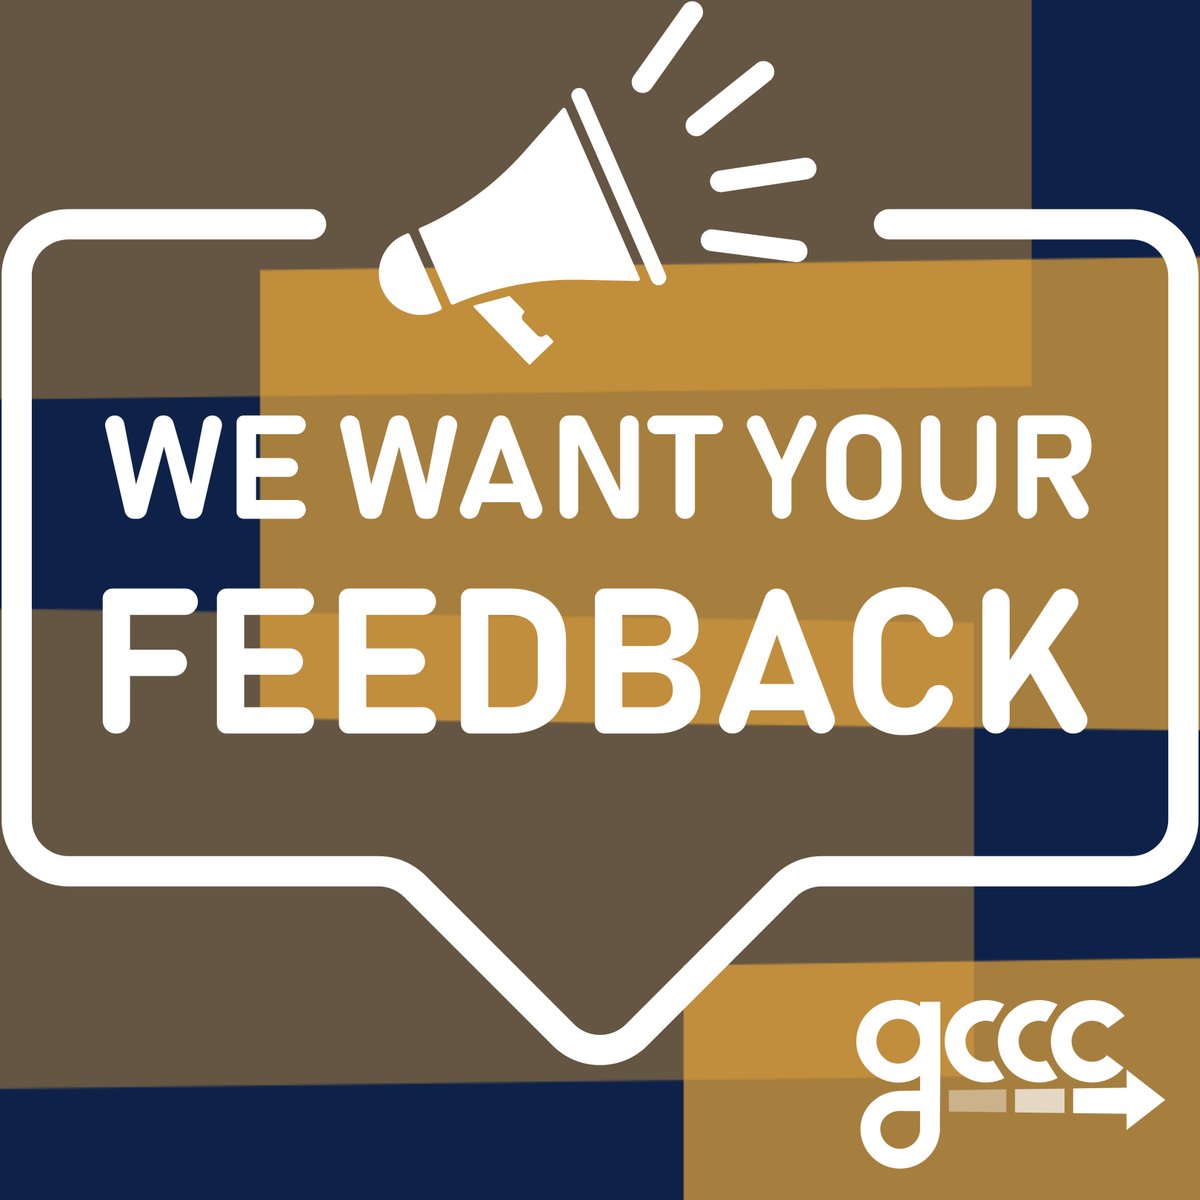 We are committed to meaningfully engaging communities that affect and are affected by our work. From now until June 16th, we are seeking ✏️ input to understand how organizations in our region interact with various communities.❓ Will you share with us? ow.ly/yiXF50OGCP8